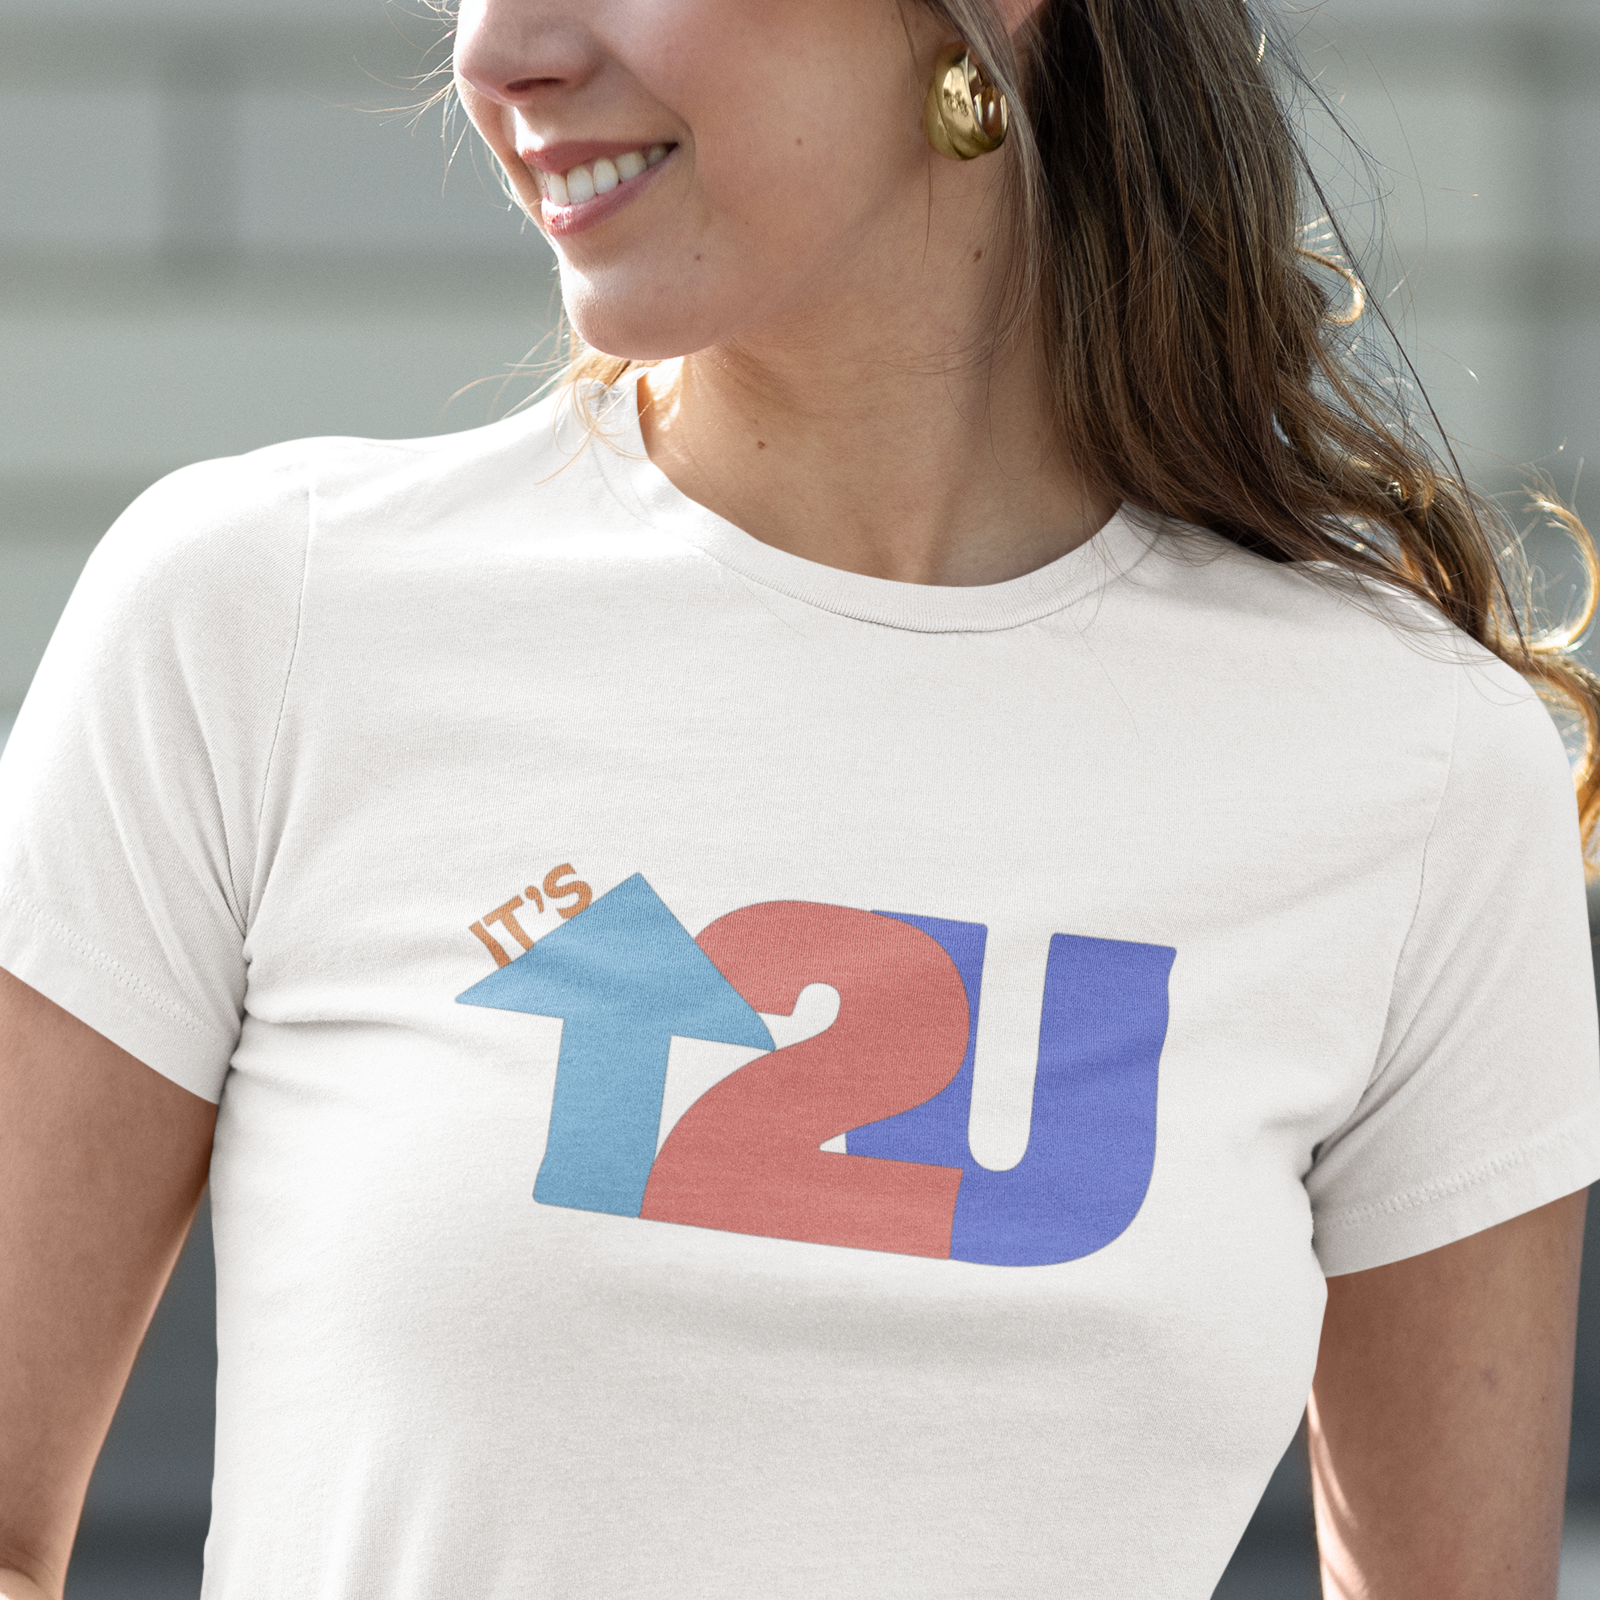 It's Up to You t-shirt